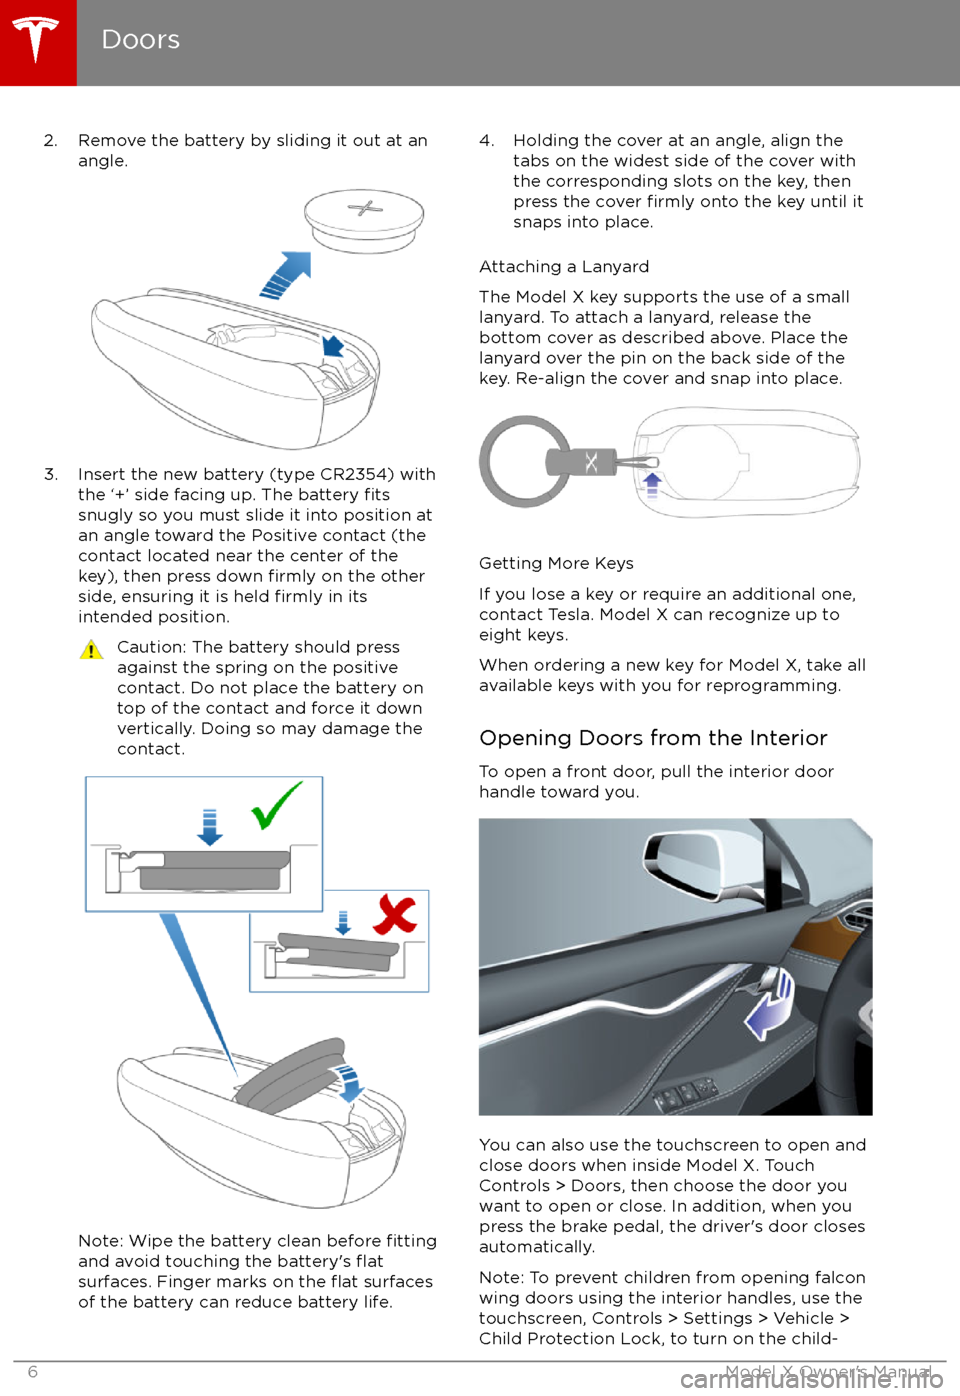 TESLA MODEL X 2017  Owners Manual  2. Remove the battery by sliding it out at anangle.
3. Insert the new battery (type CR2354) withthe 